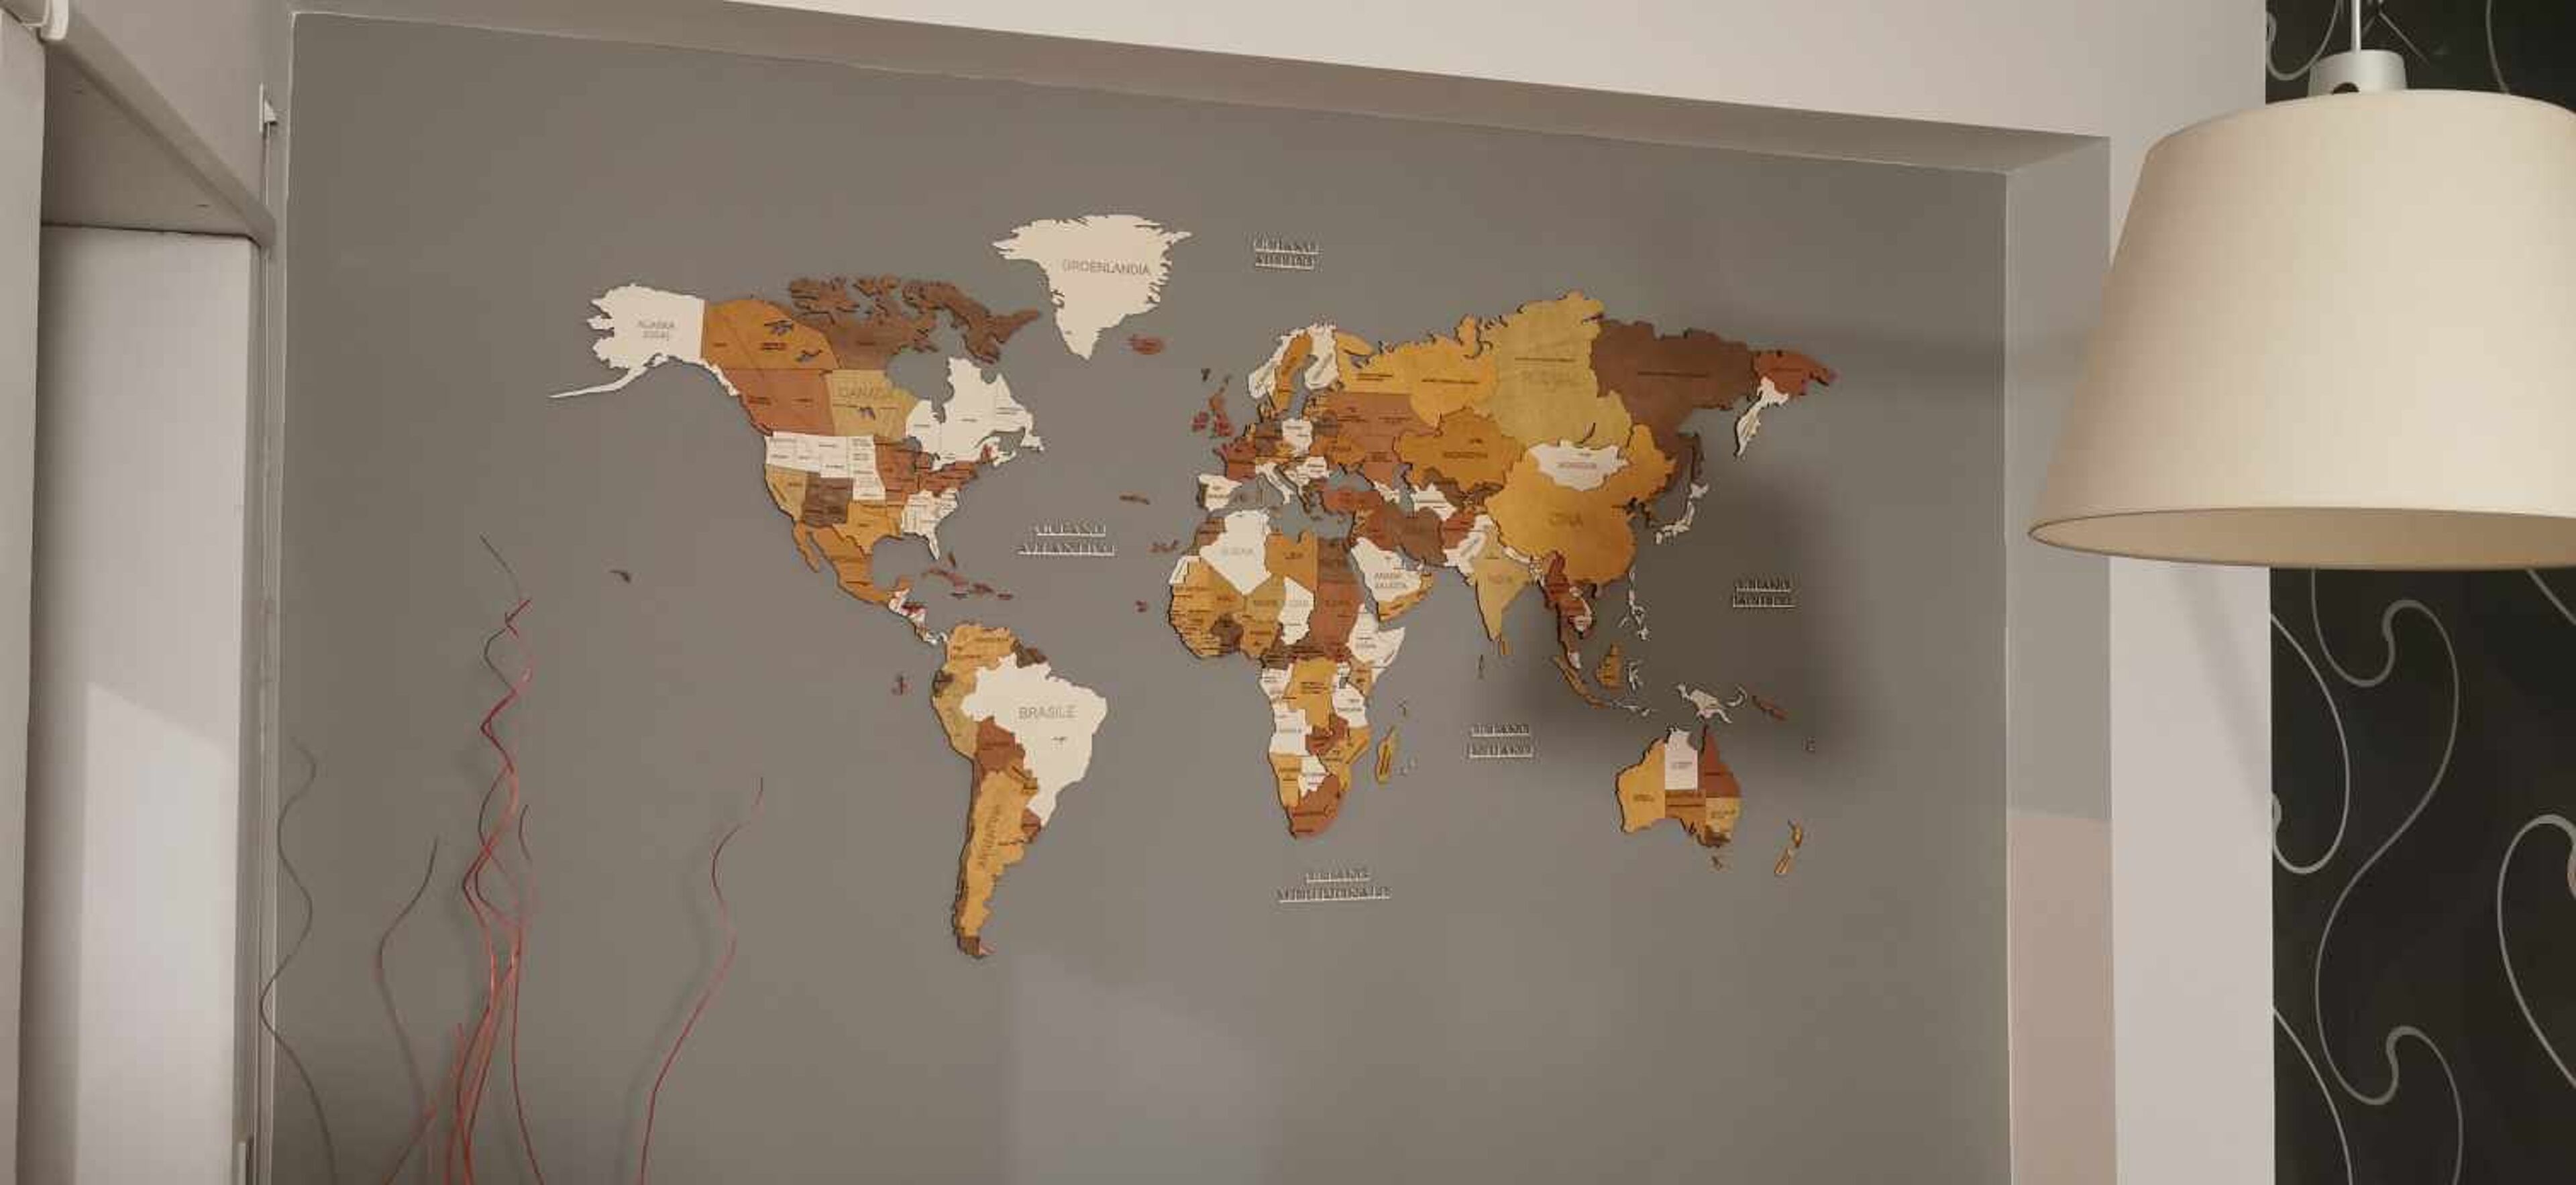 Review for Wooden World Map Wall Decoration - image from Fabio Bartuccio